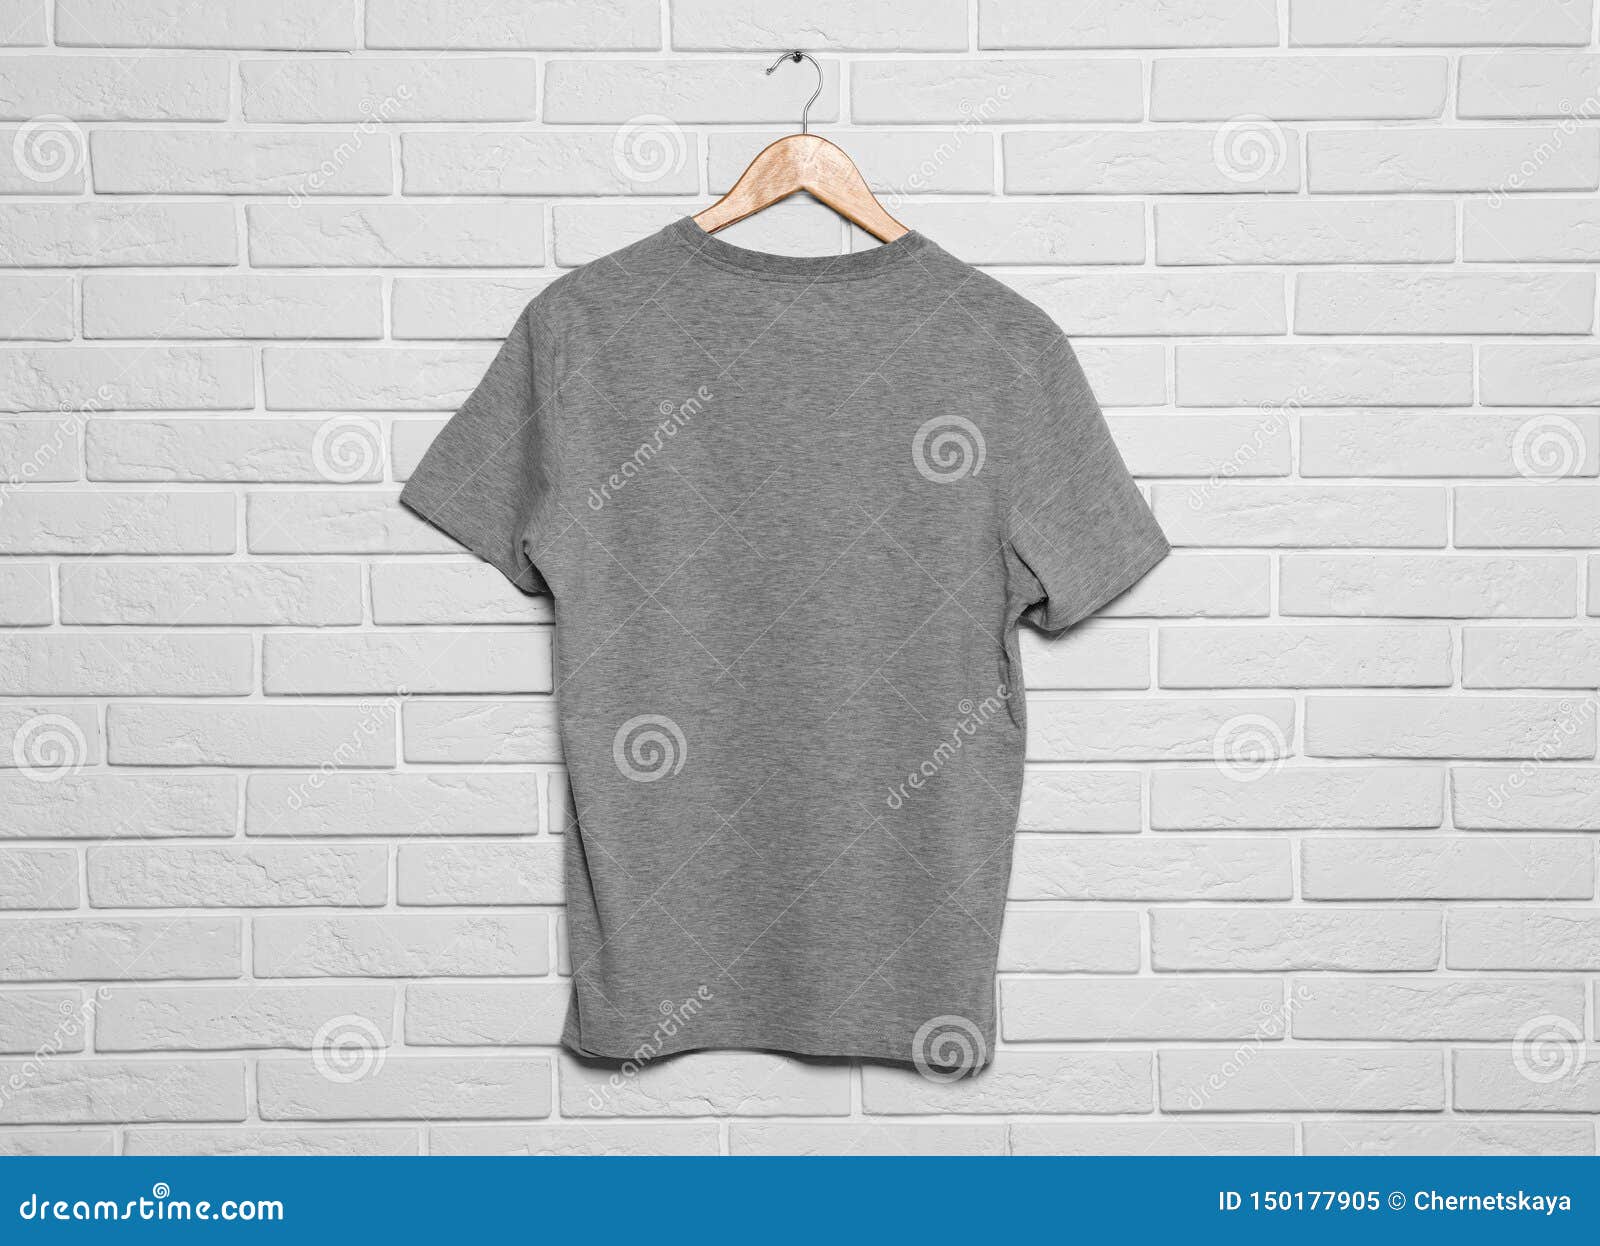 Download Hanger With Blank T-shirt On White Brick Wall Stock Image - Image of brick, object: 150177905